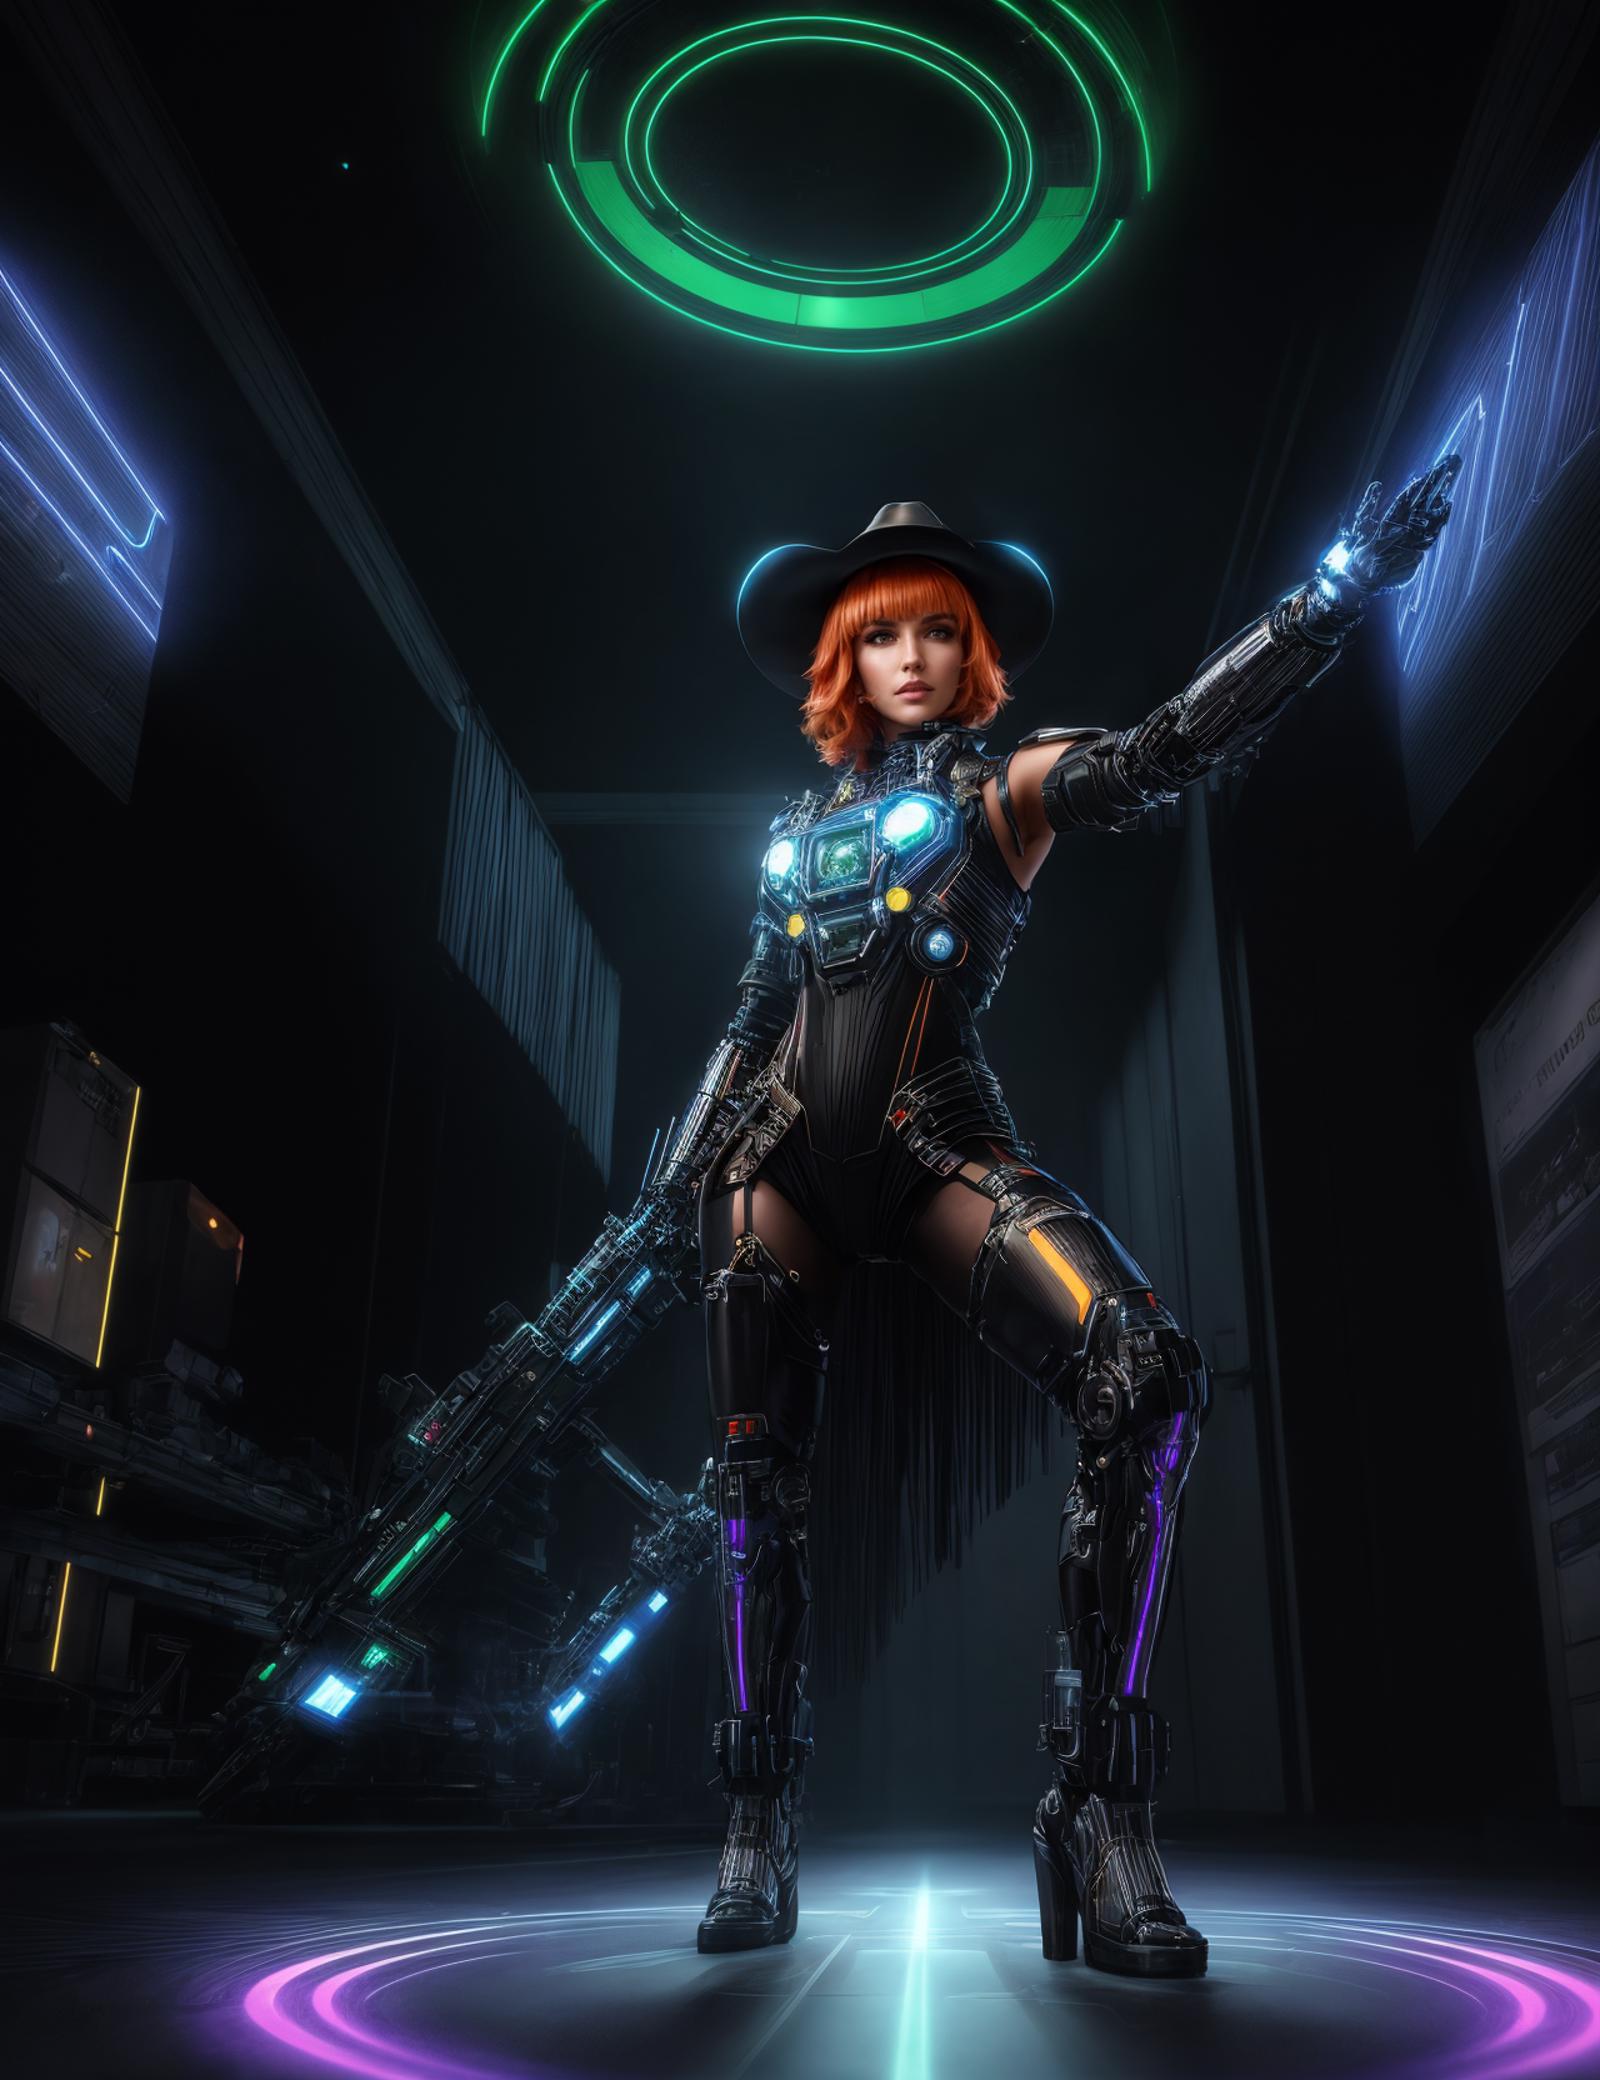 Billions of Characters - Cyberpunk extension, clothings, poses, lightings, beings etc. image by DonMischo